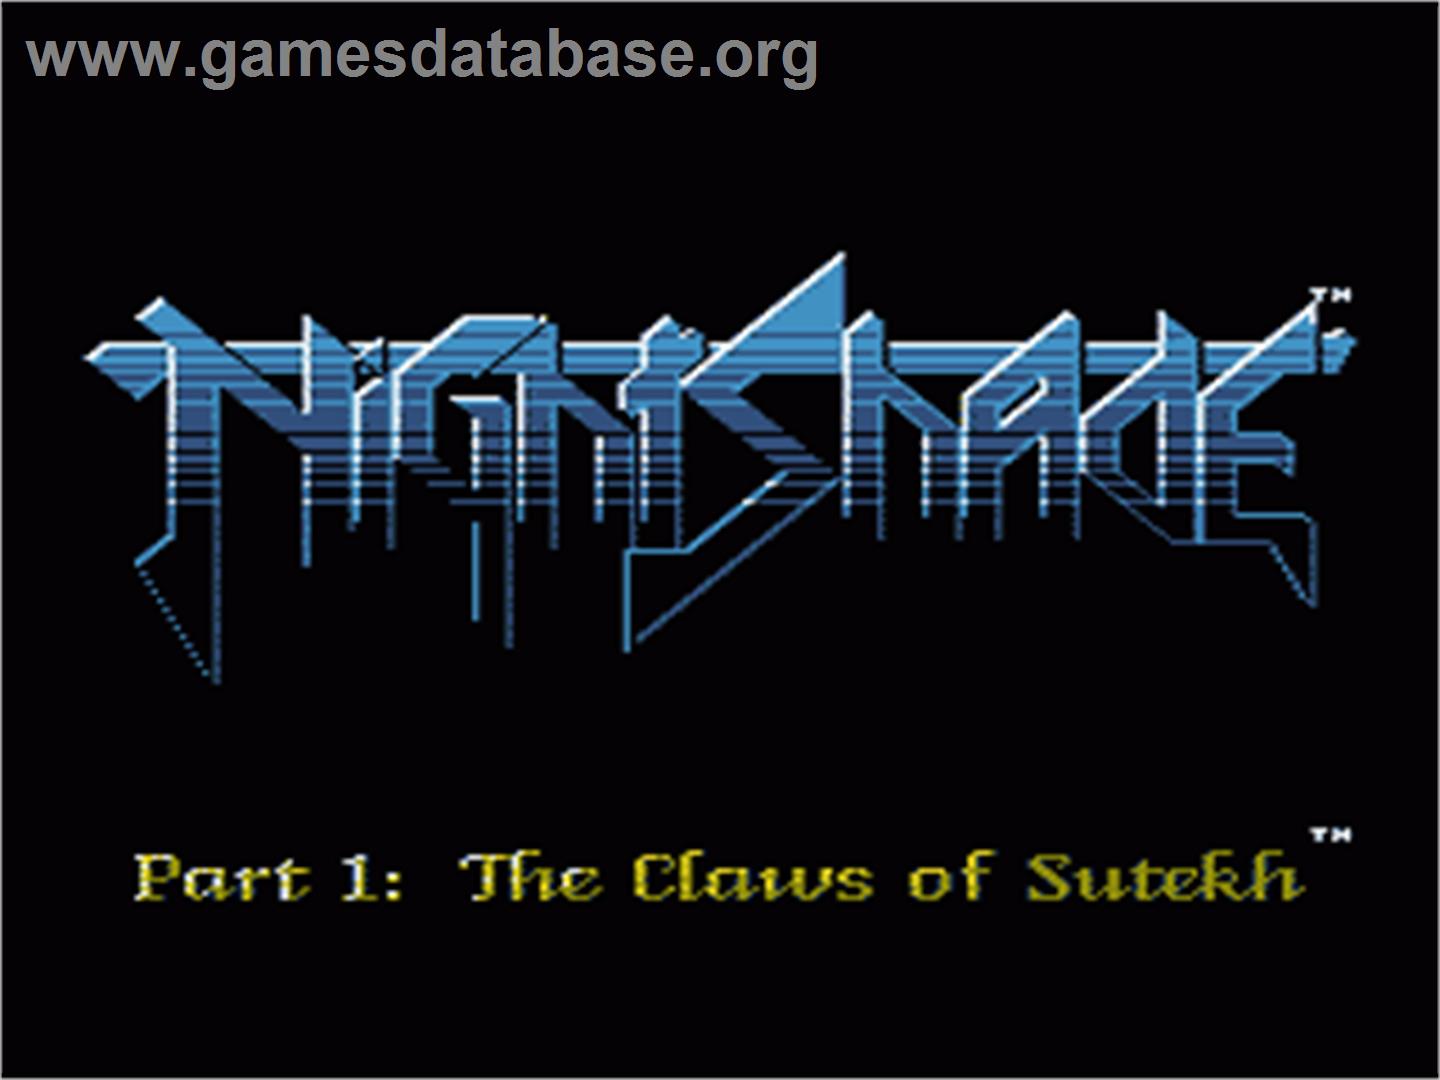 Nightshade: Part 1 - The Claws of Sutekh - Nintendo NES - Artwork - Title Screen